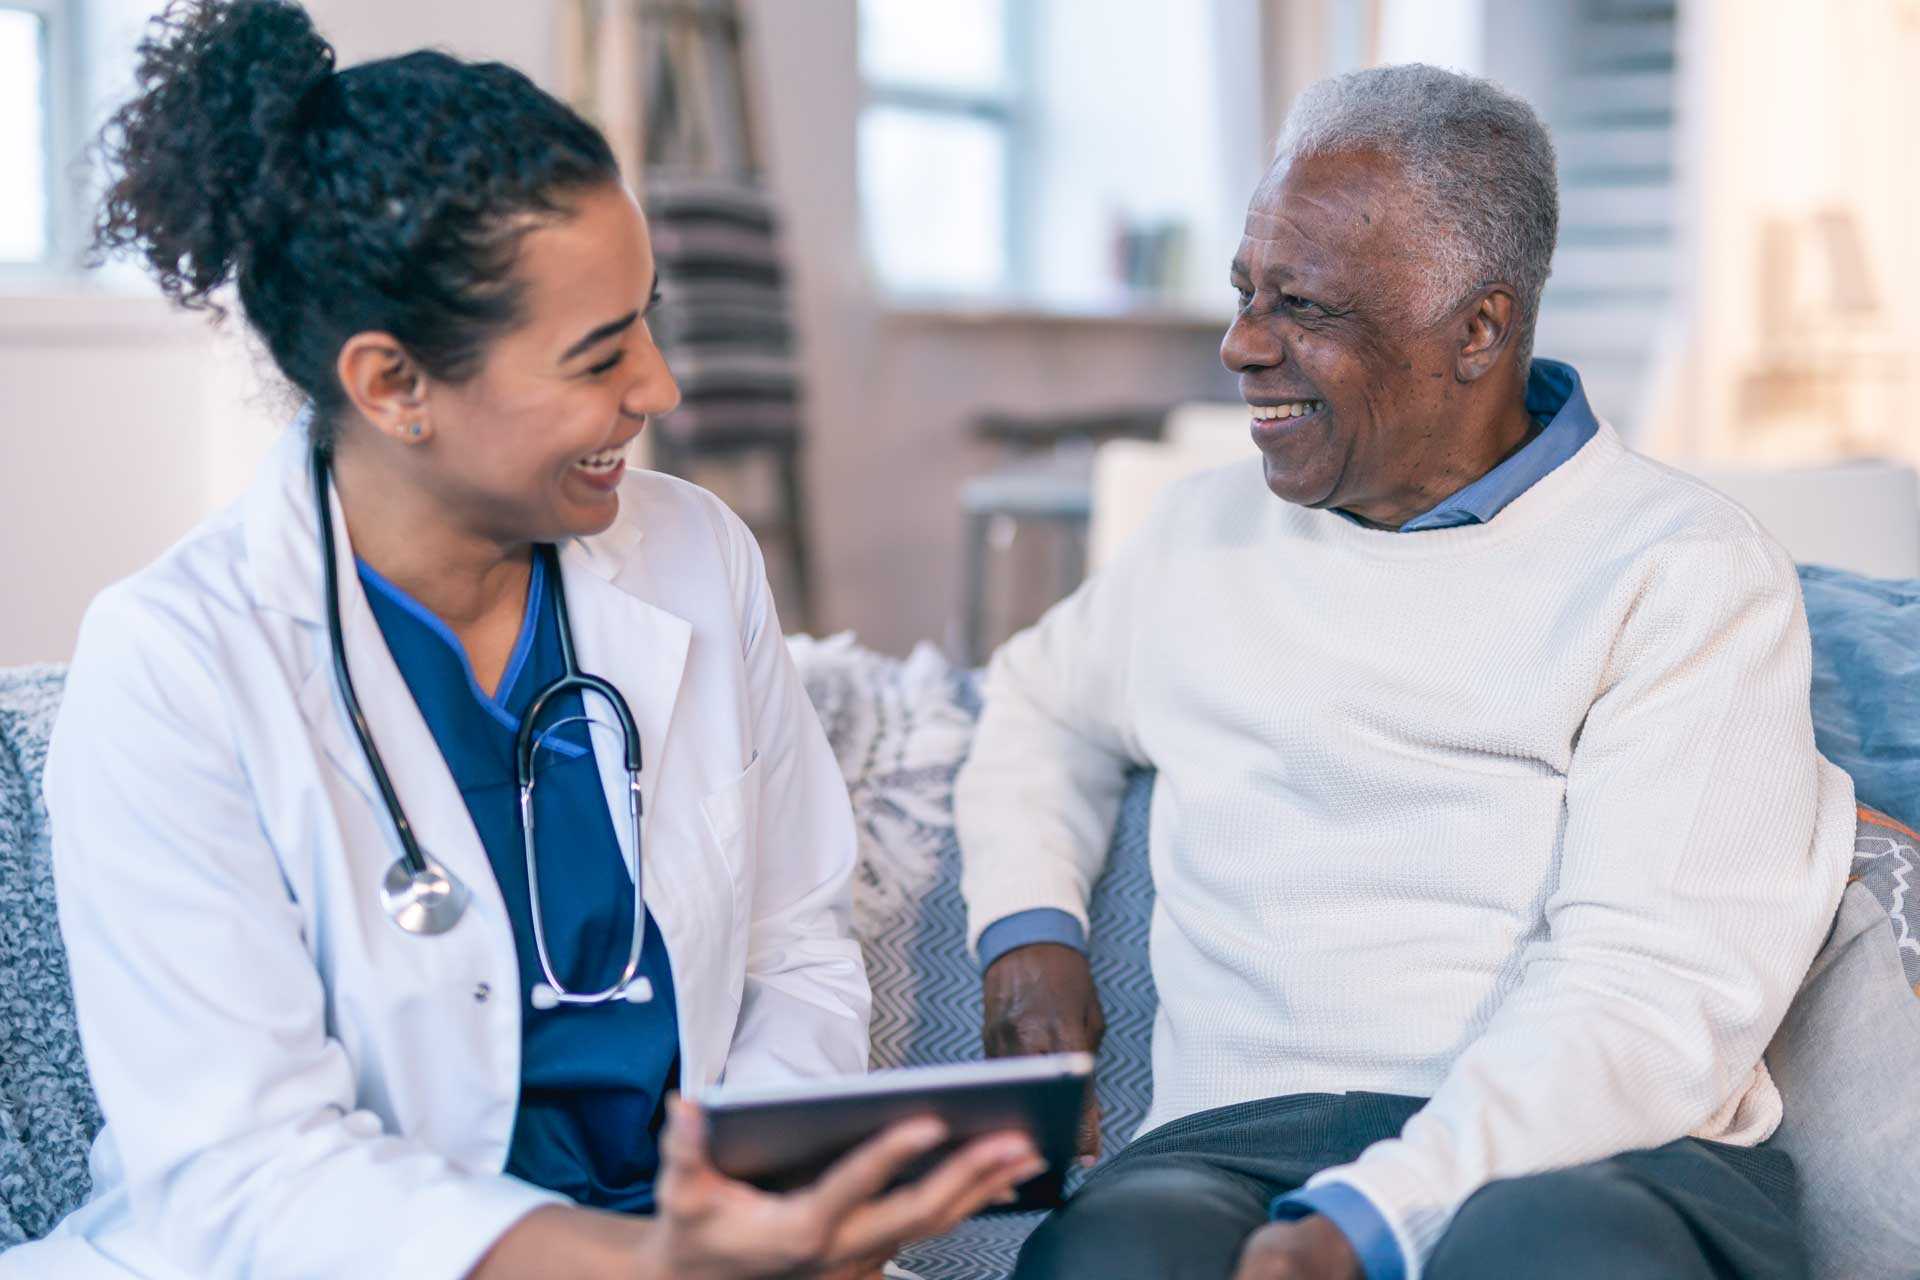 Smiling young female doctor talking with smiling older male patient